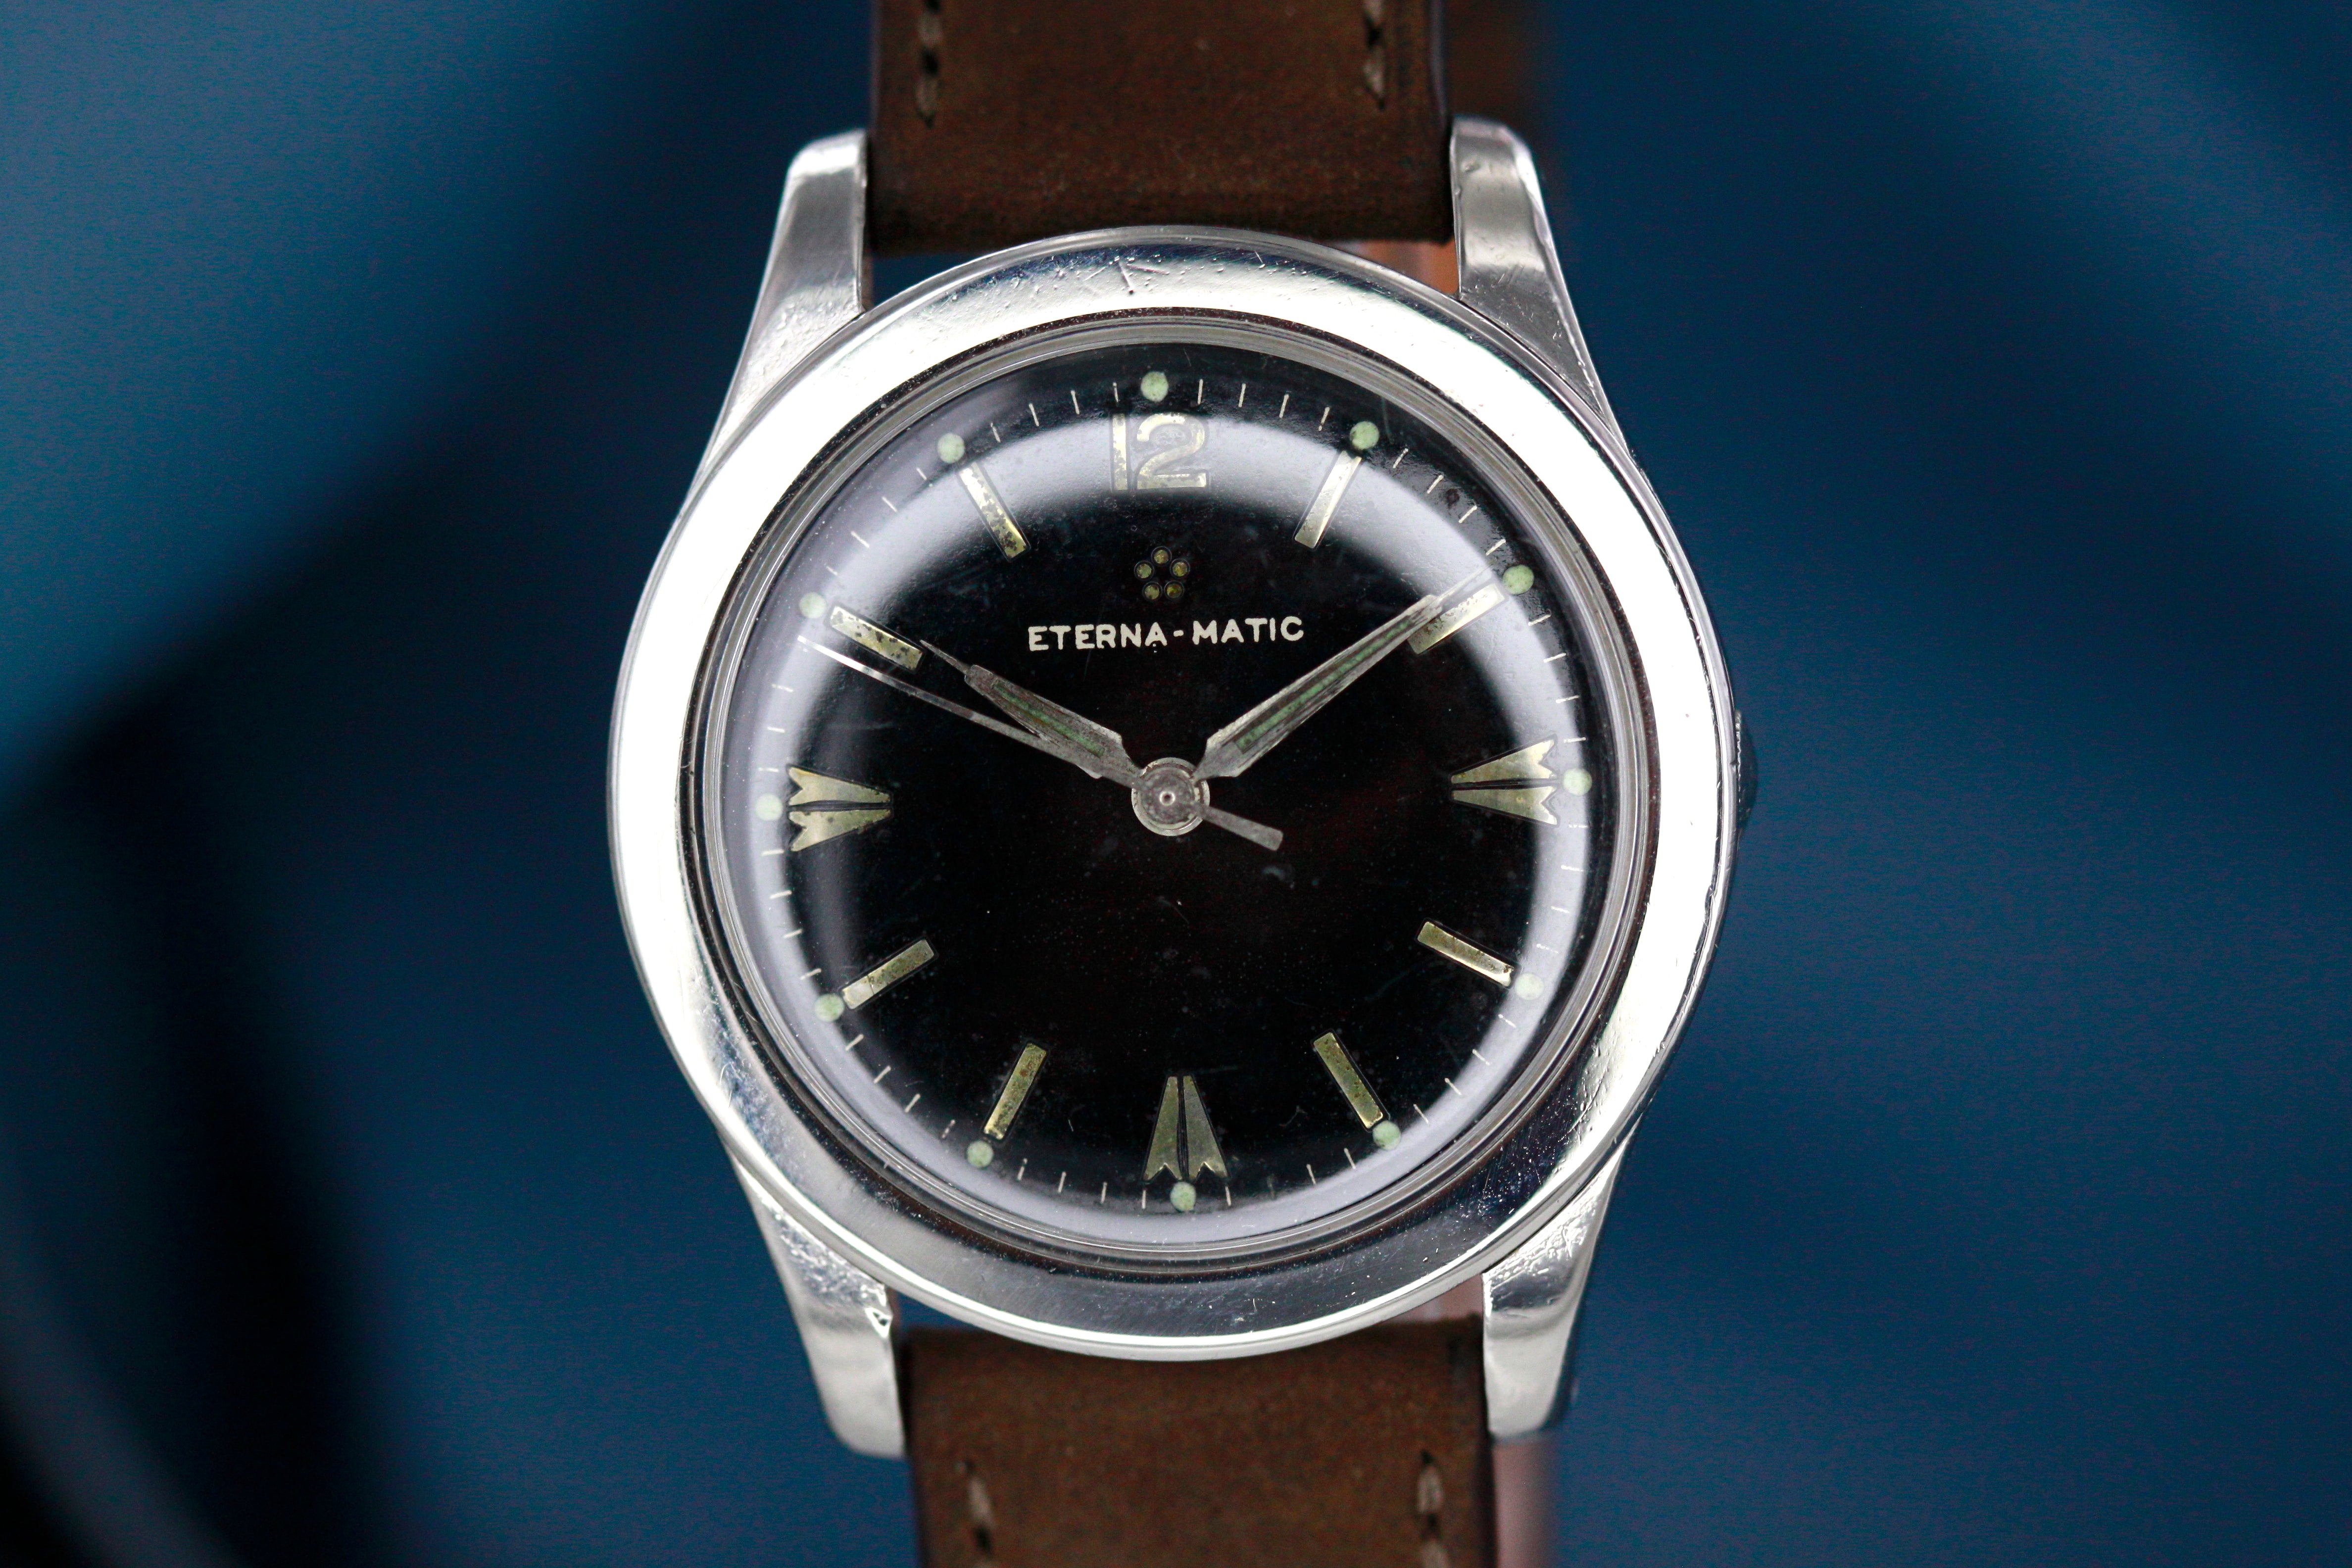 ETERNA MATIC BLACK DIAL GLOSSY FROM THE 60S